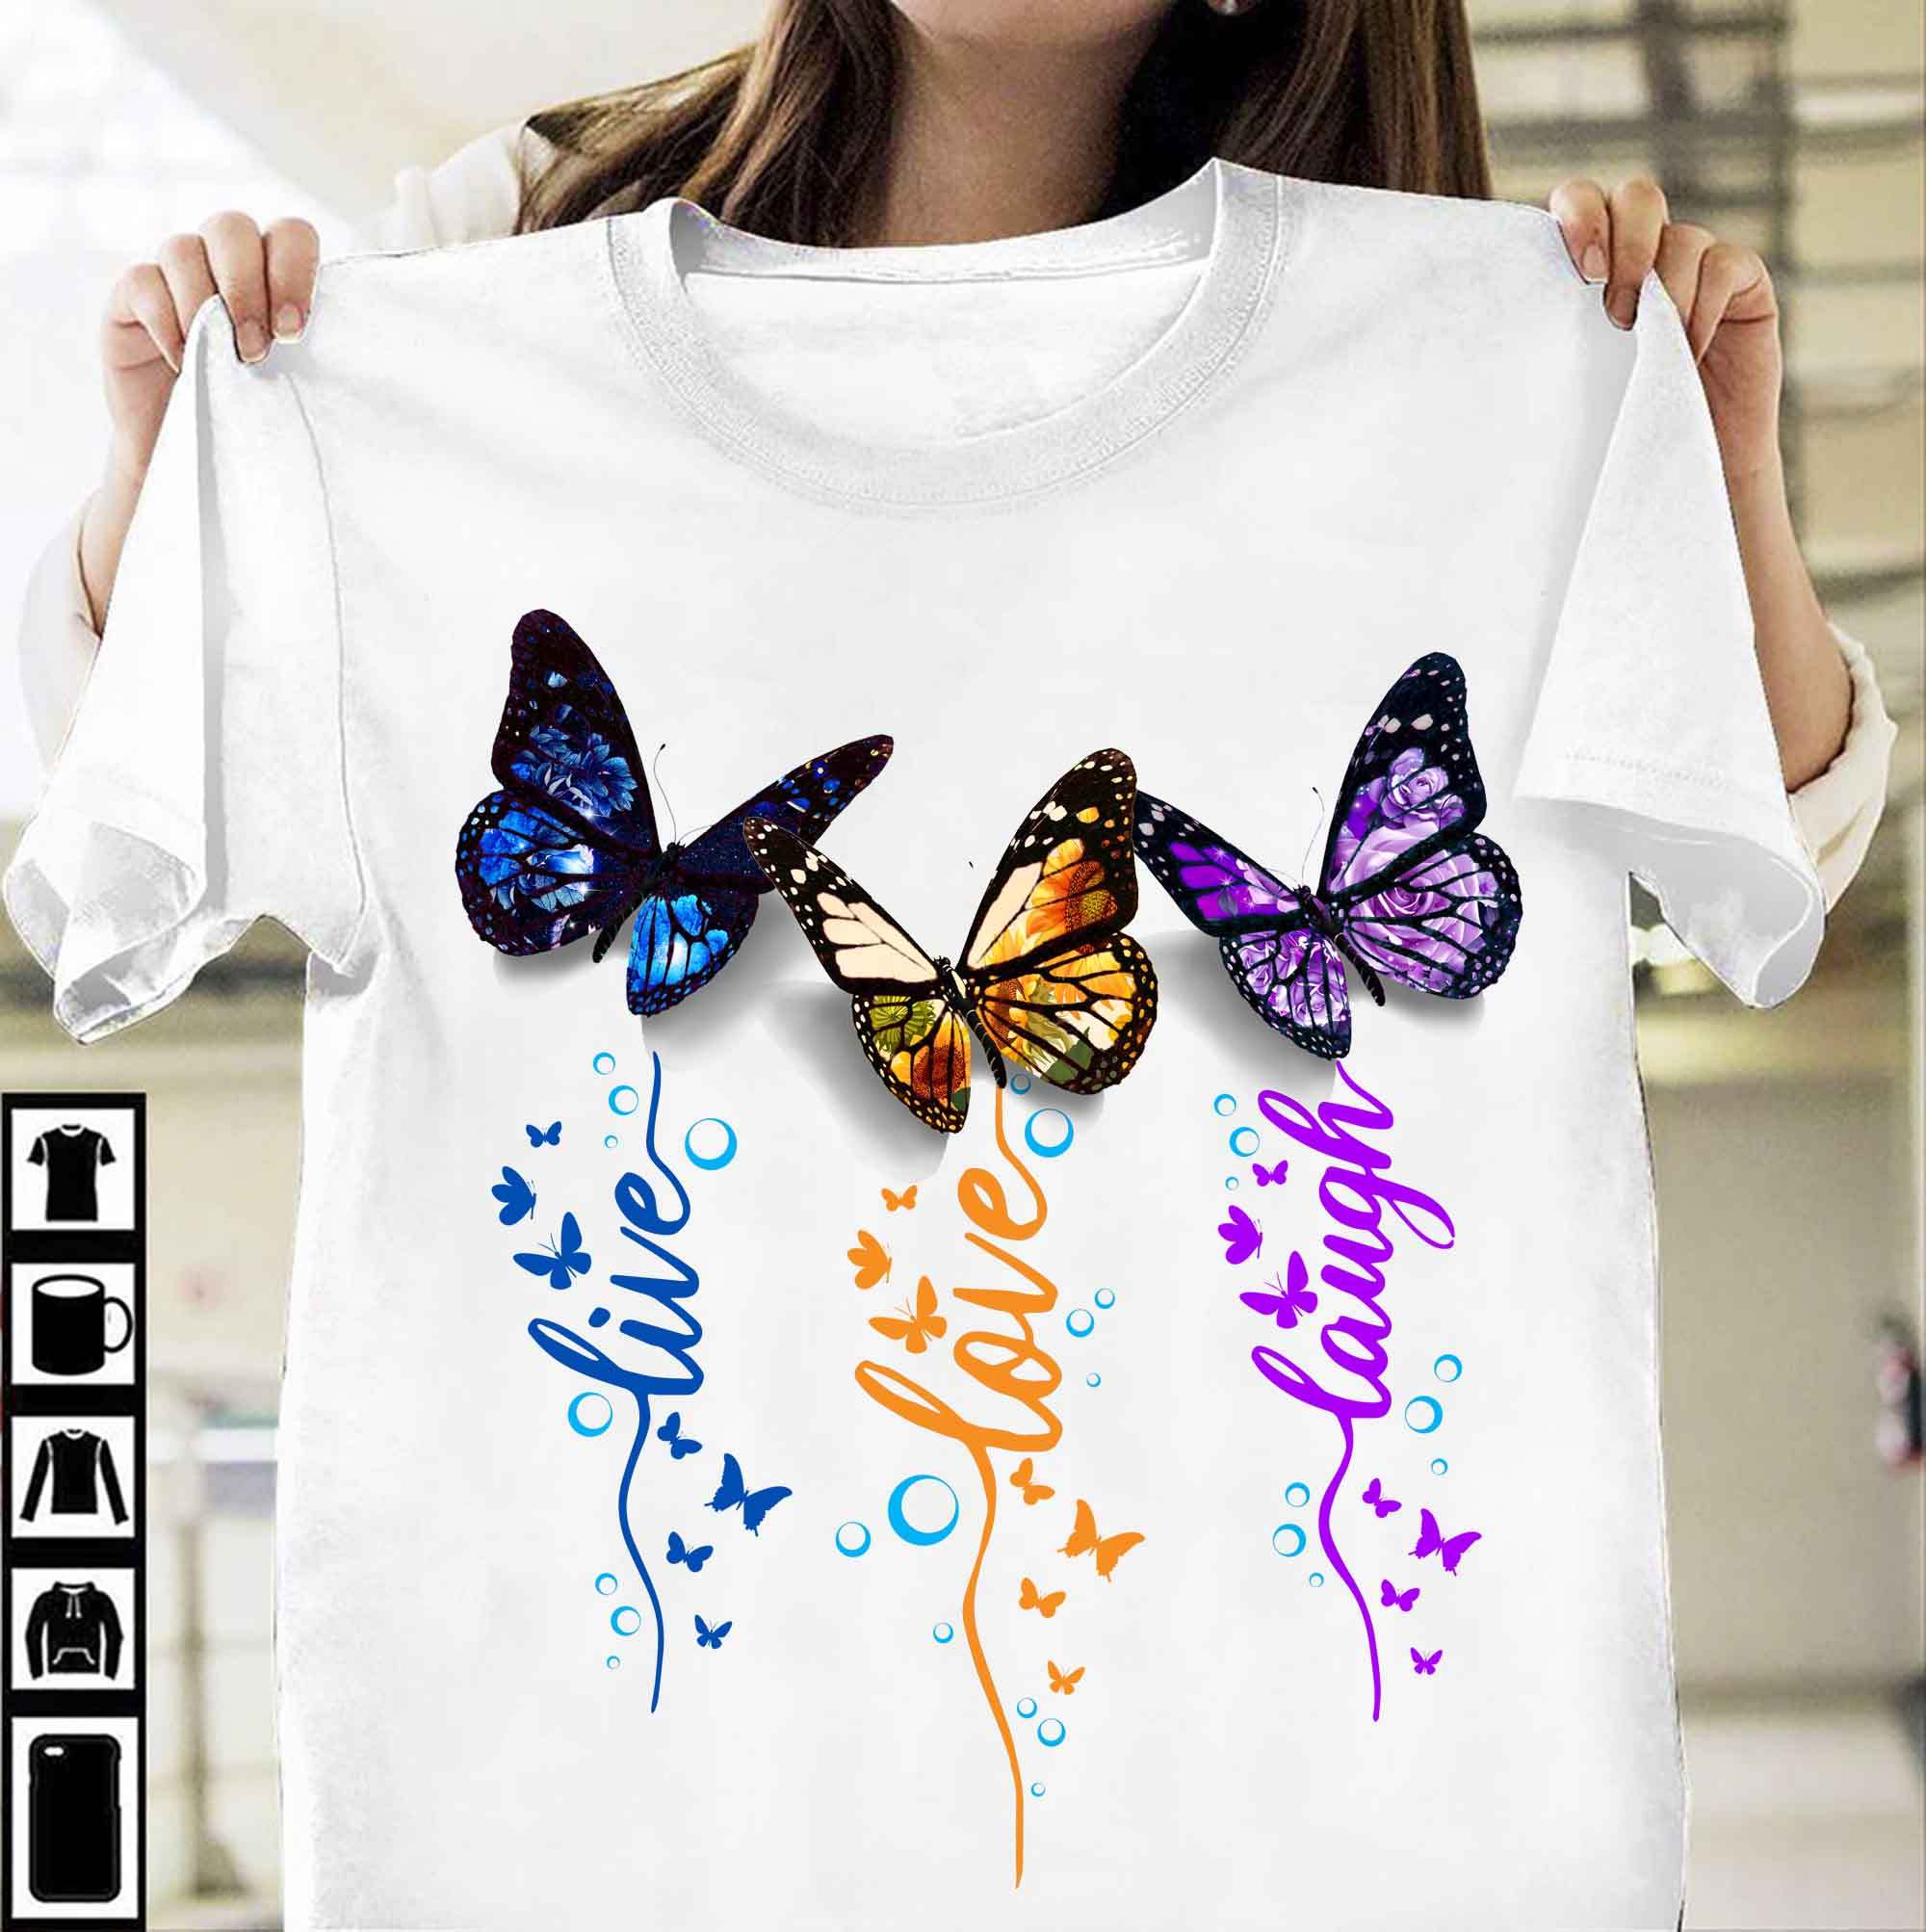 Live love laugh - Beautiful colorful butterflies, butterflies the animal